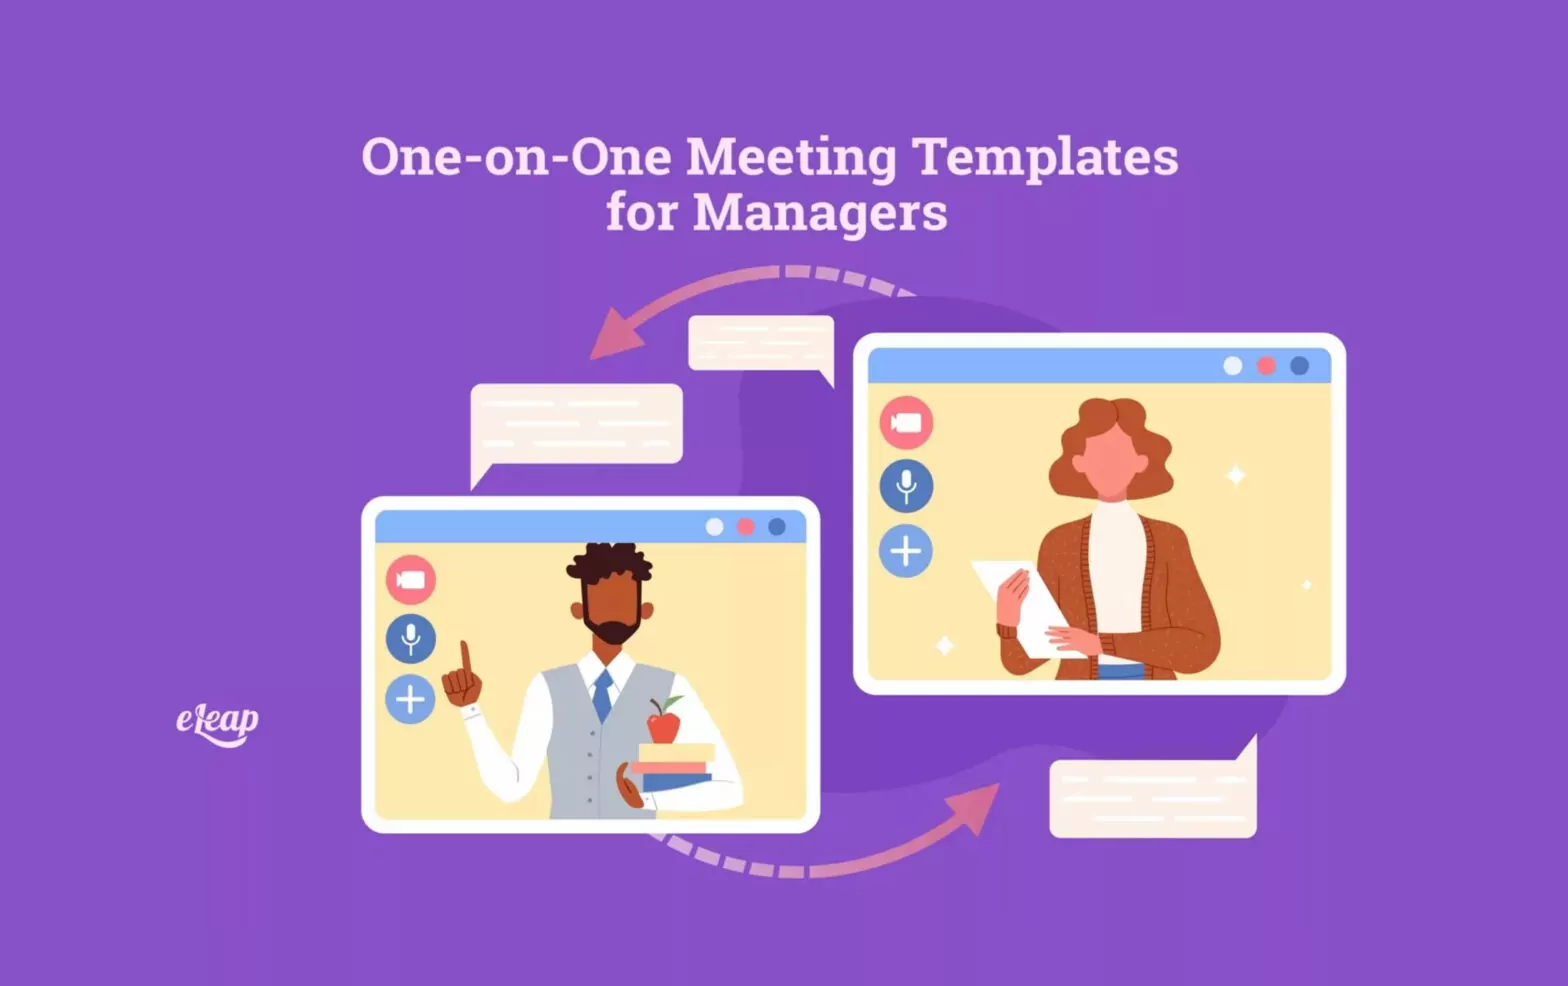 One-on-One Meeting Templates for Managers